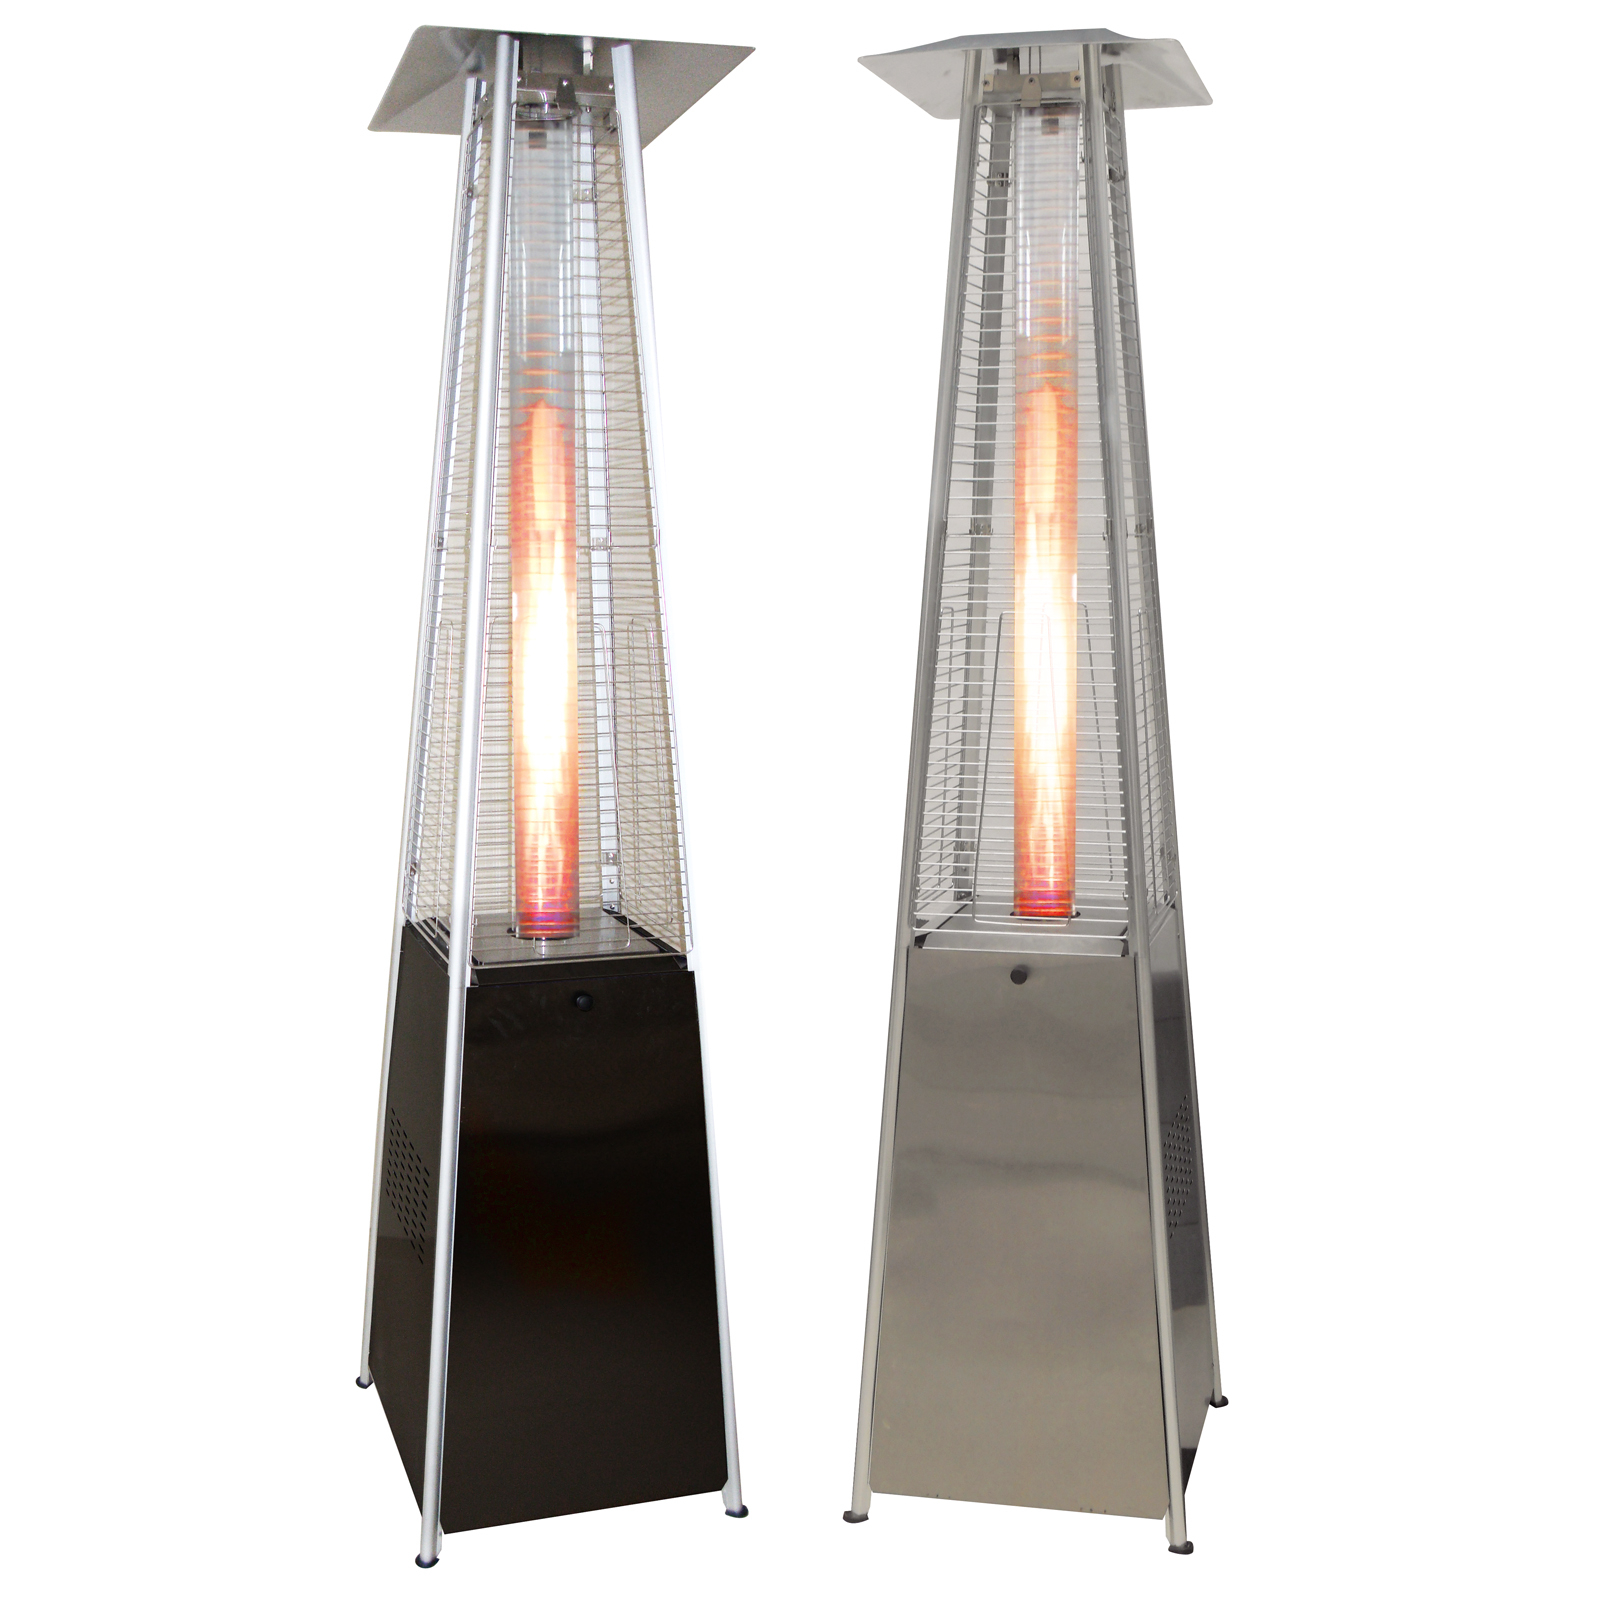 Gas Heaters Outdoor Gas Heaters Costco pertaining to proportions 1600 X 1600